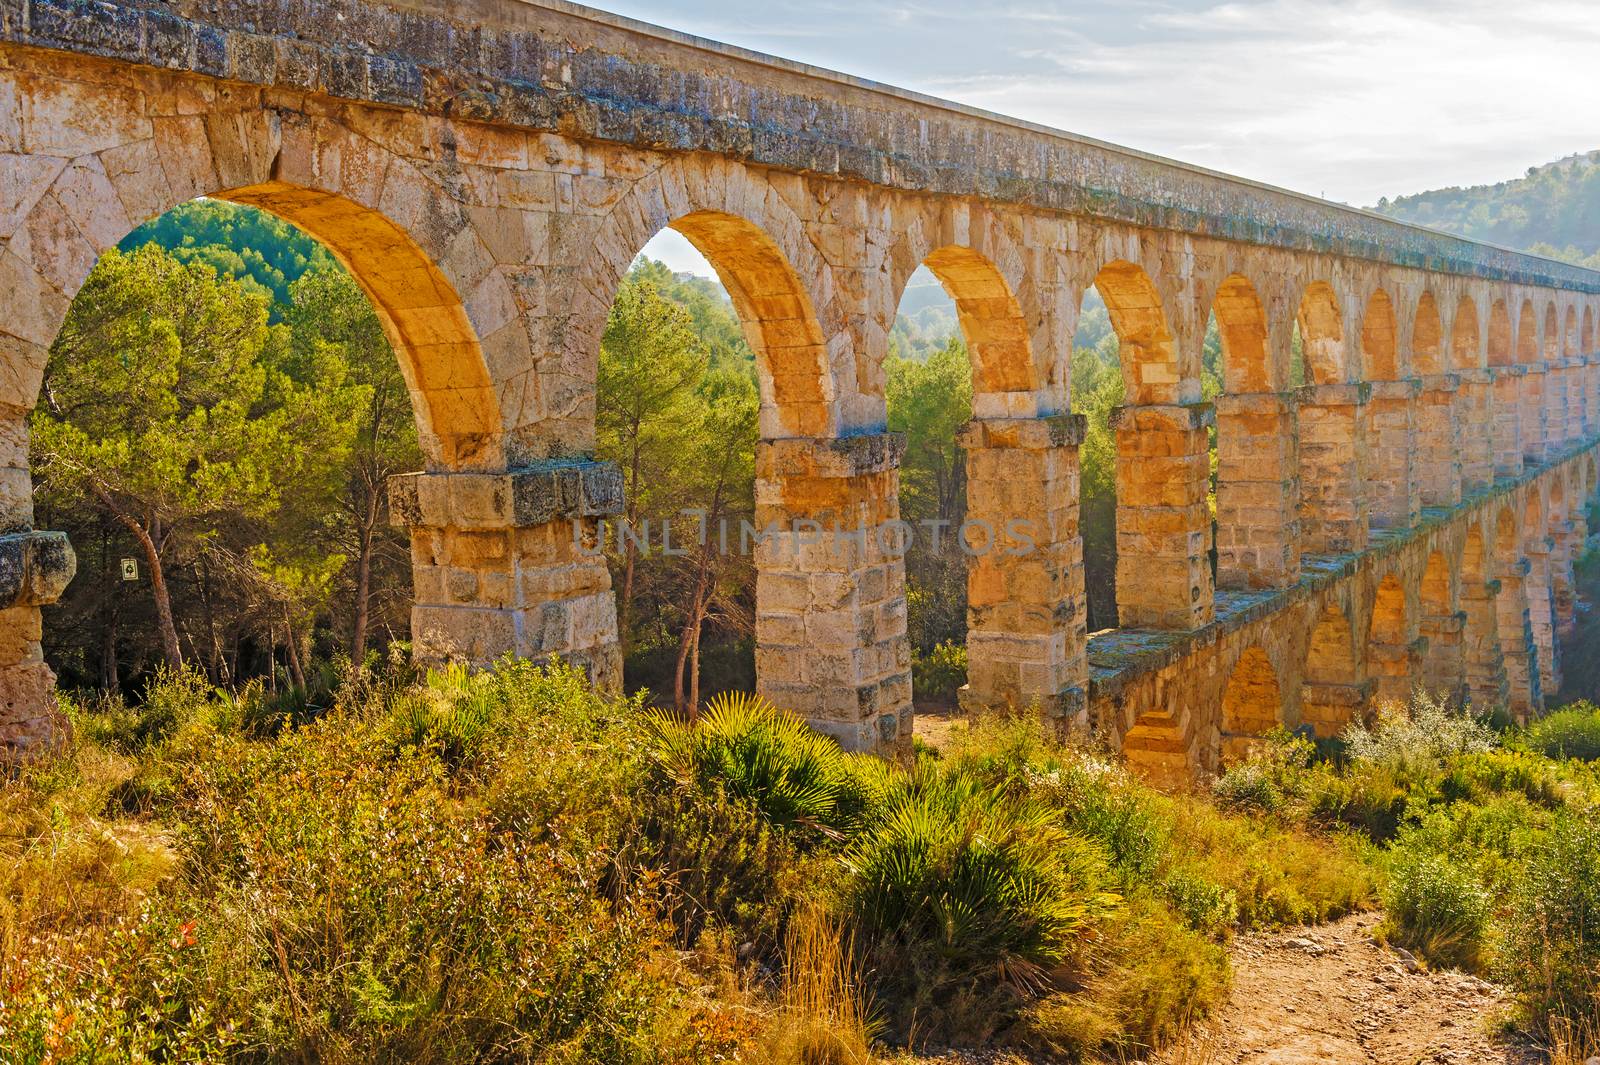 Aqueducts from the Roman area  (1st century) build between the sides of the Arcs ravine which brought the water from the Francoli river to the ancient city of Tarraco, capital of the Roman province of Hispania.